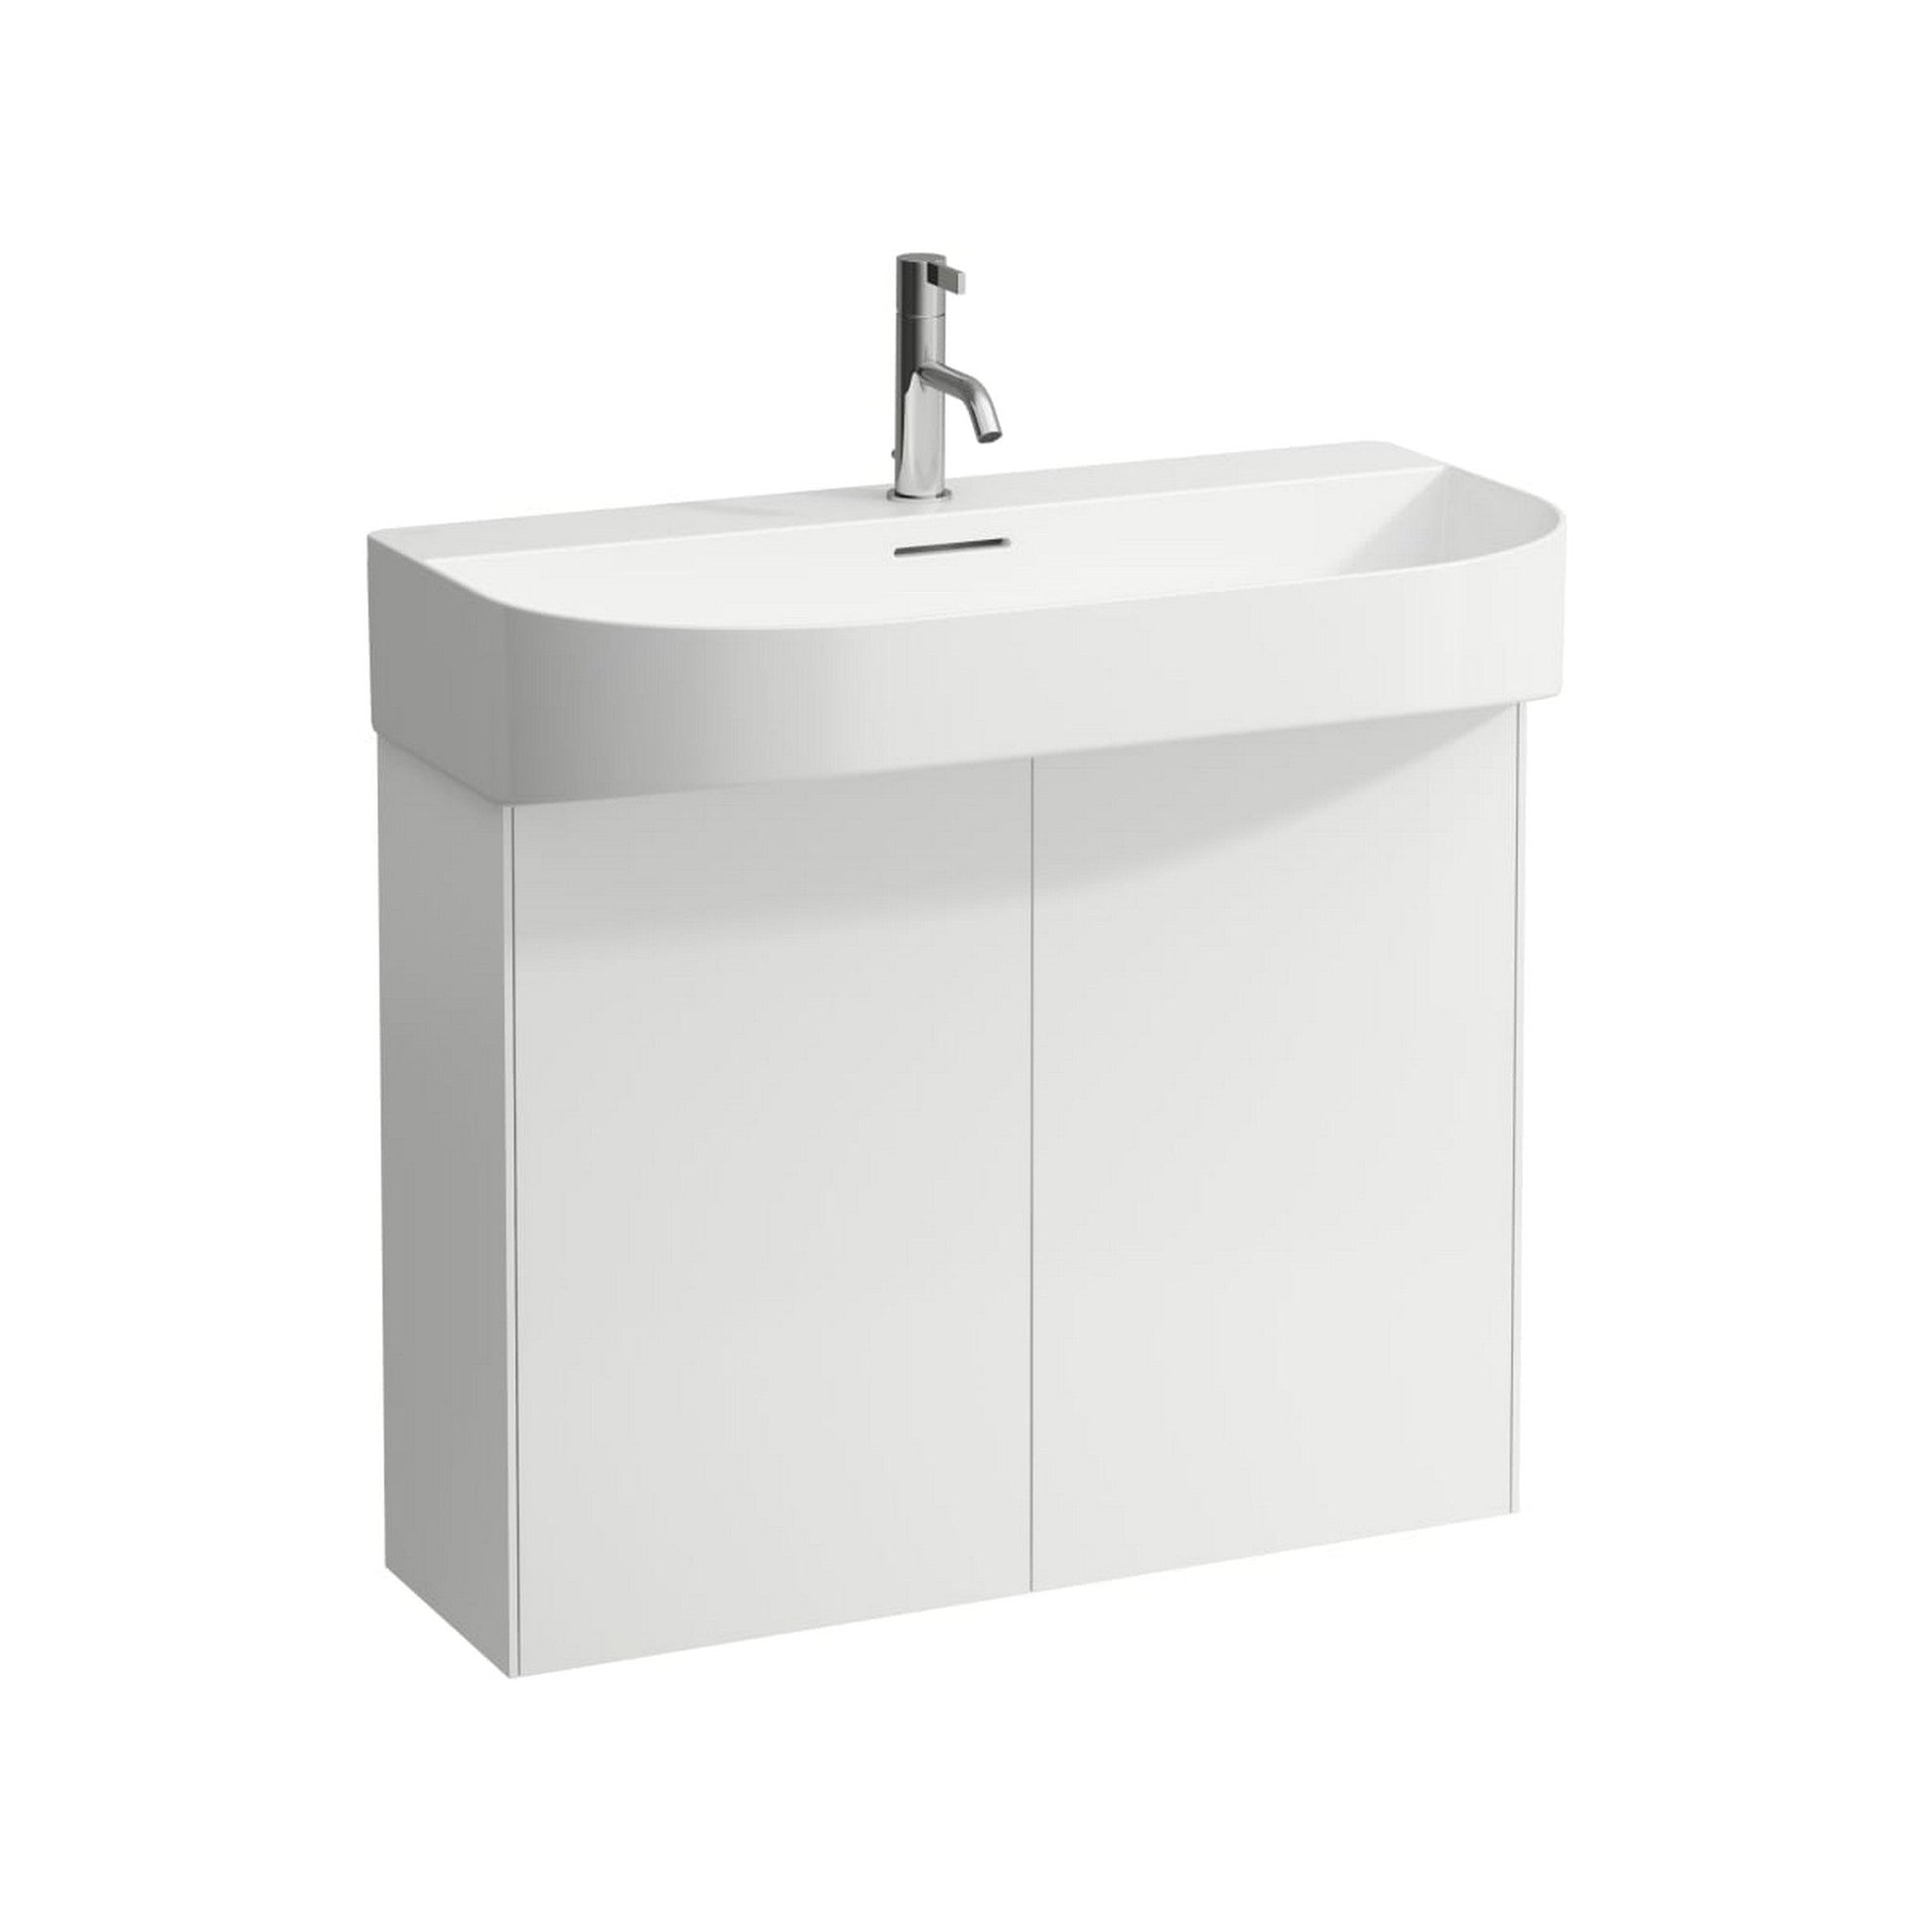 Laufen Sonar 32" Matte White Ceramic Wall-Mounted Bathroom Sink Without Faucet Hole